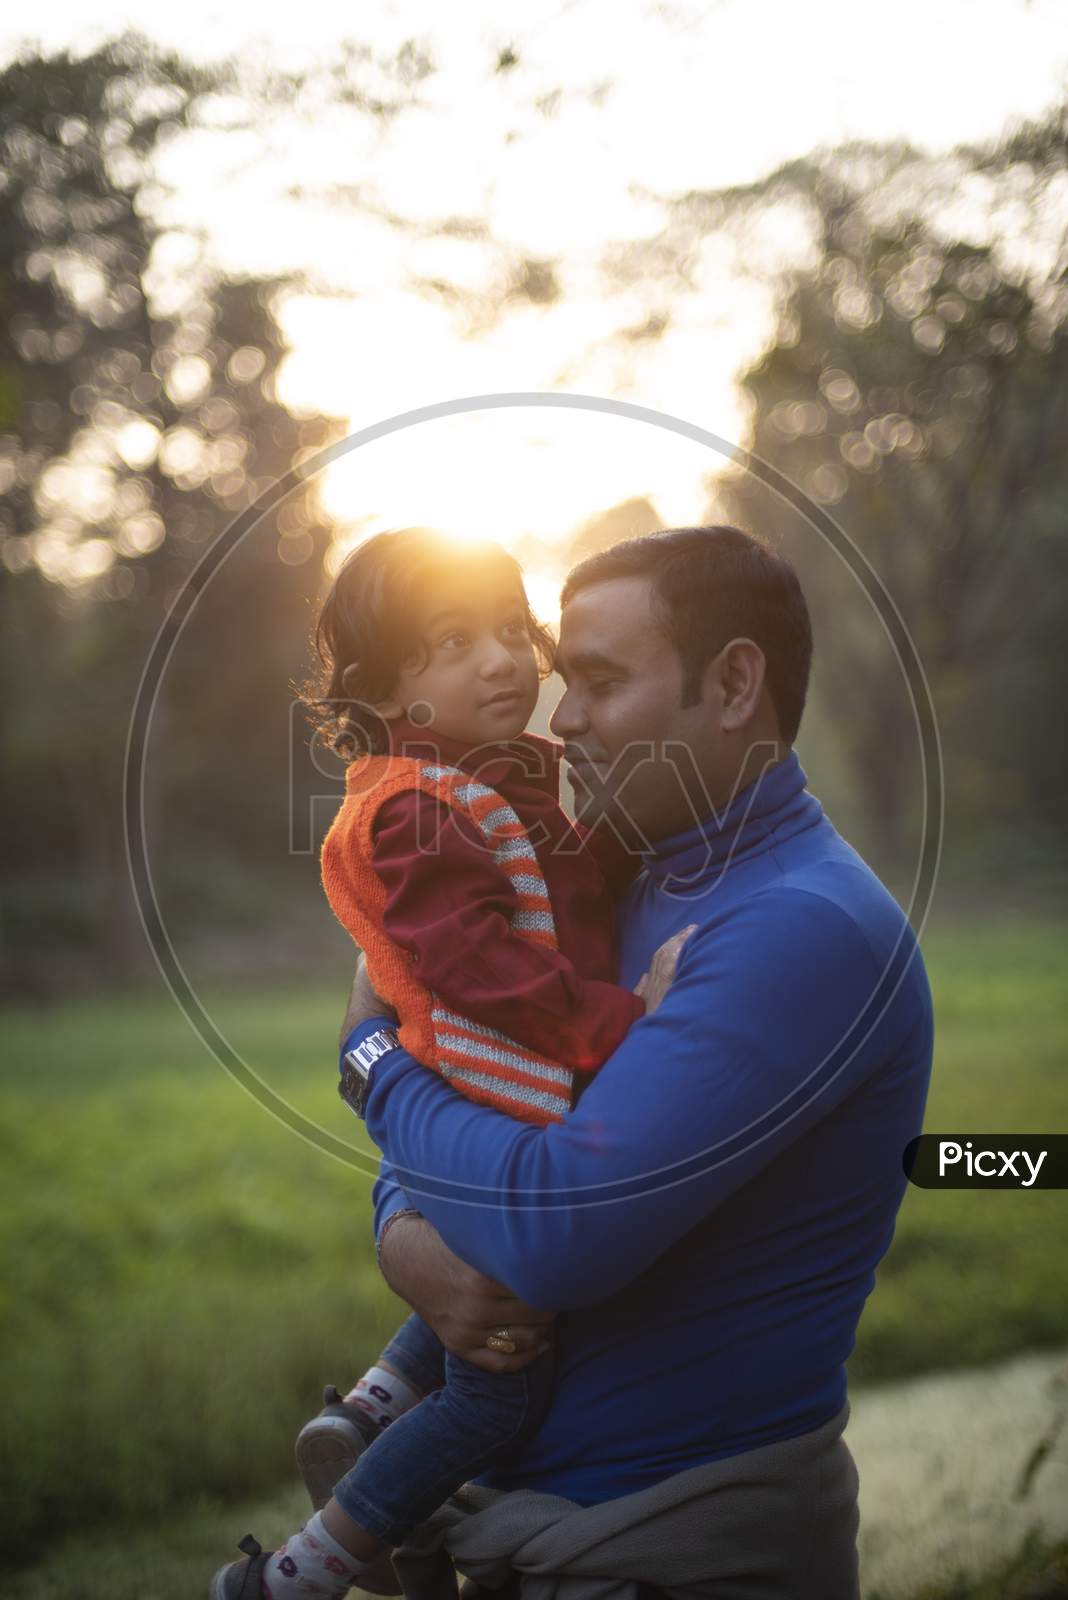 An Indian Telugu brunette father and his baby boy in winter garments enjoying themselves in winter afternoon on a  green grass field in forest background. Indian lifestyle and back light photography.